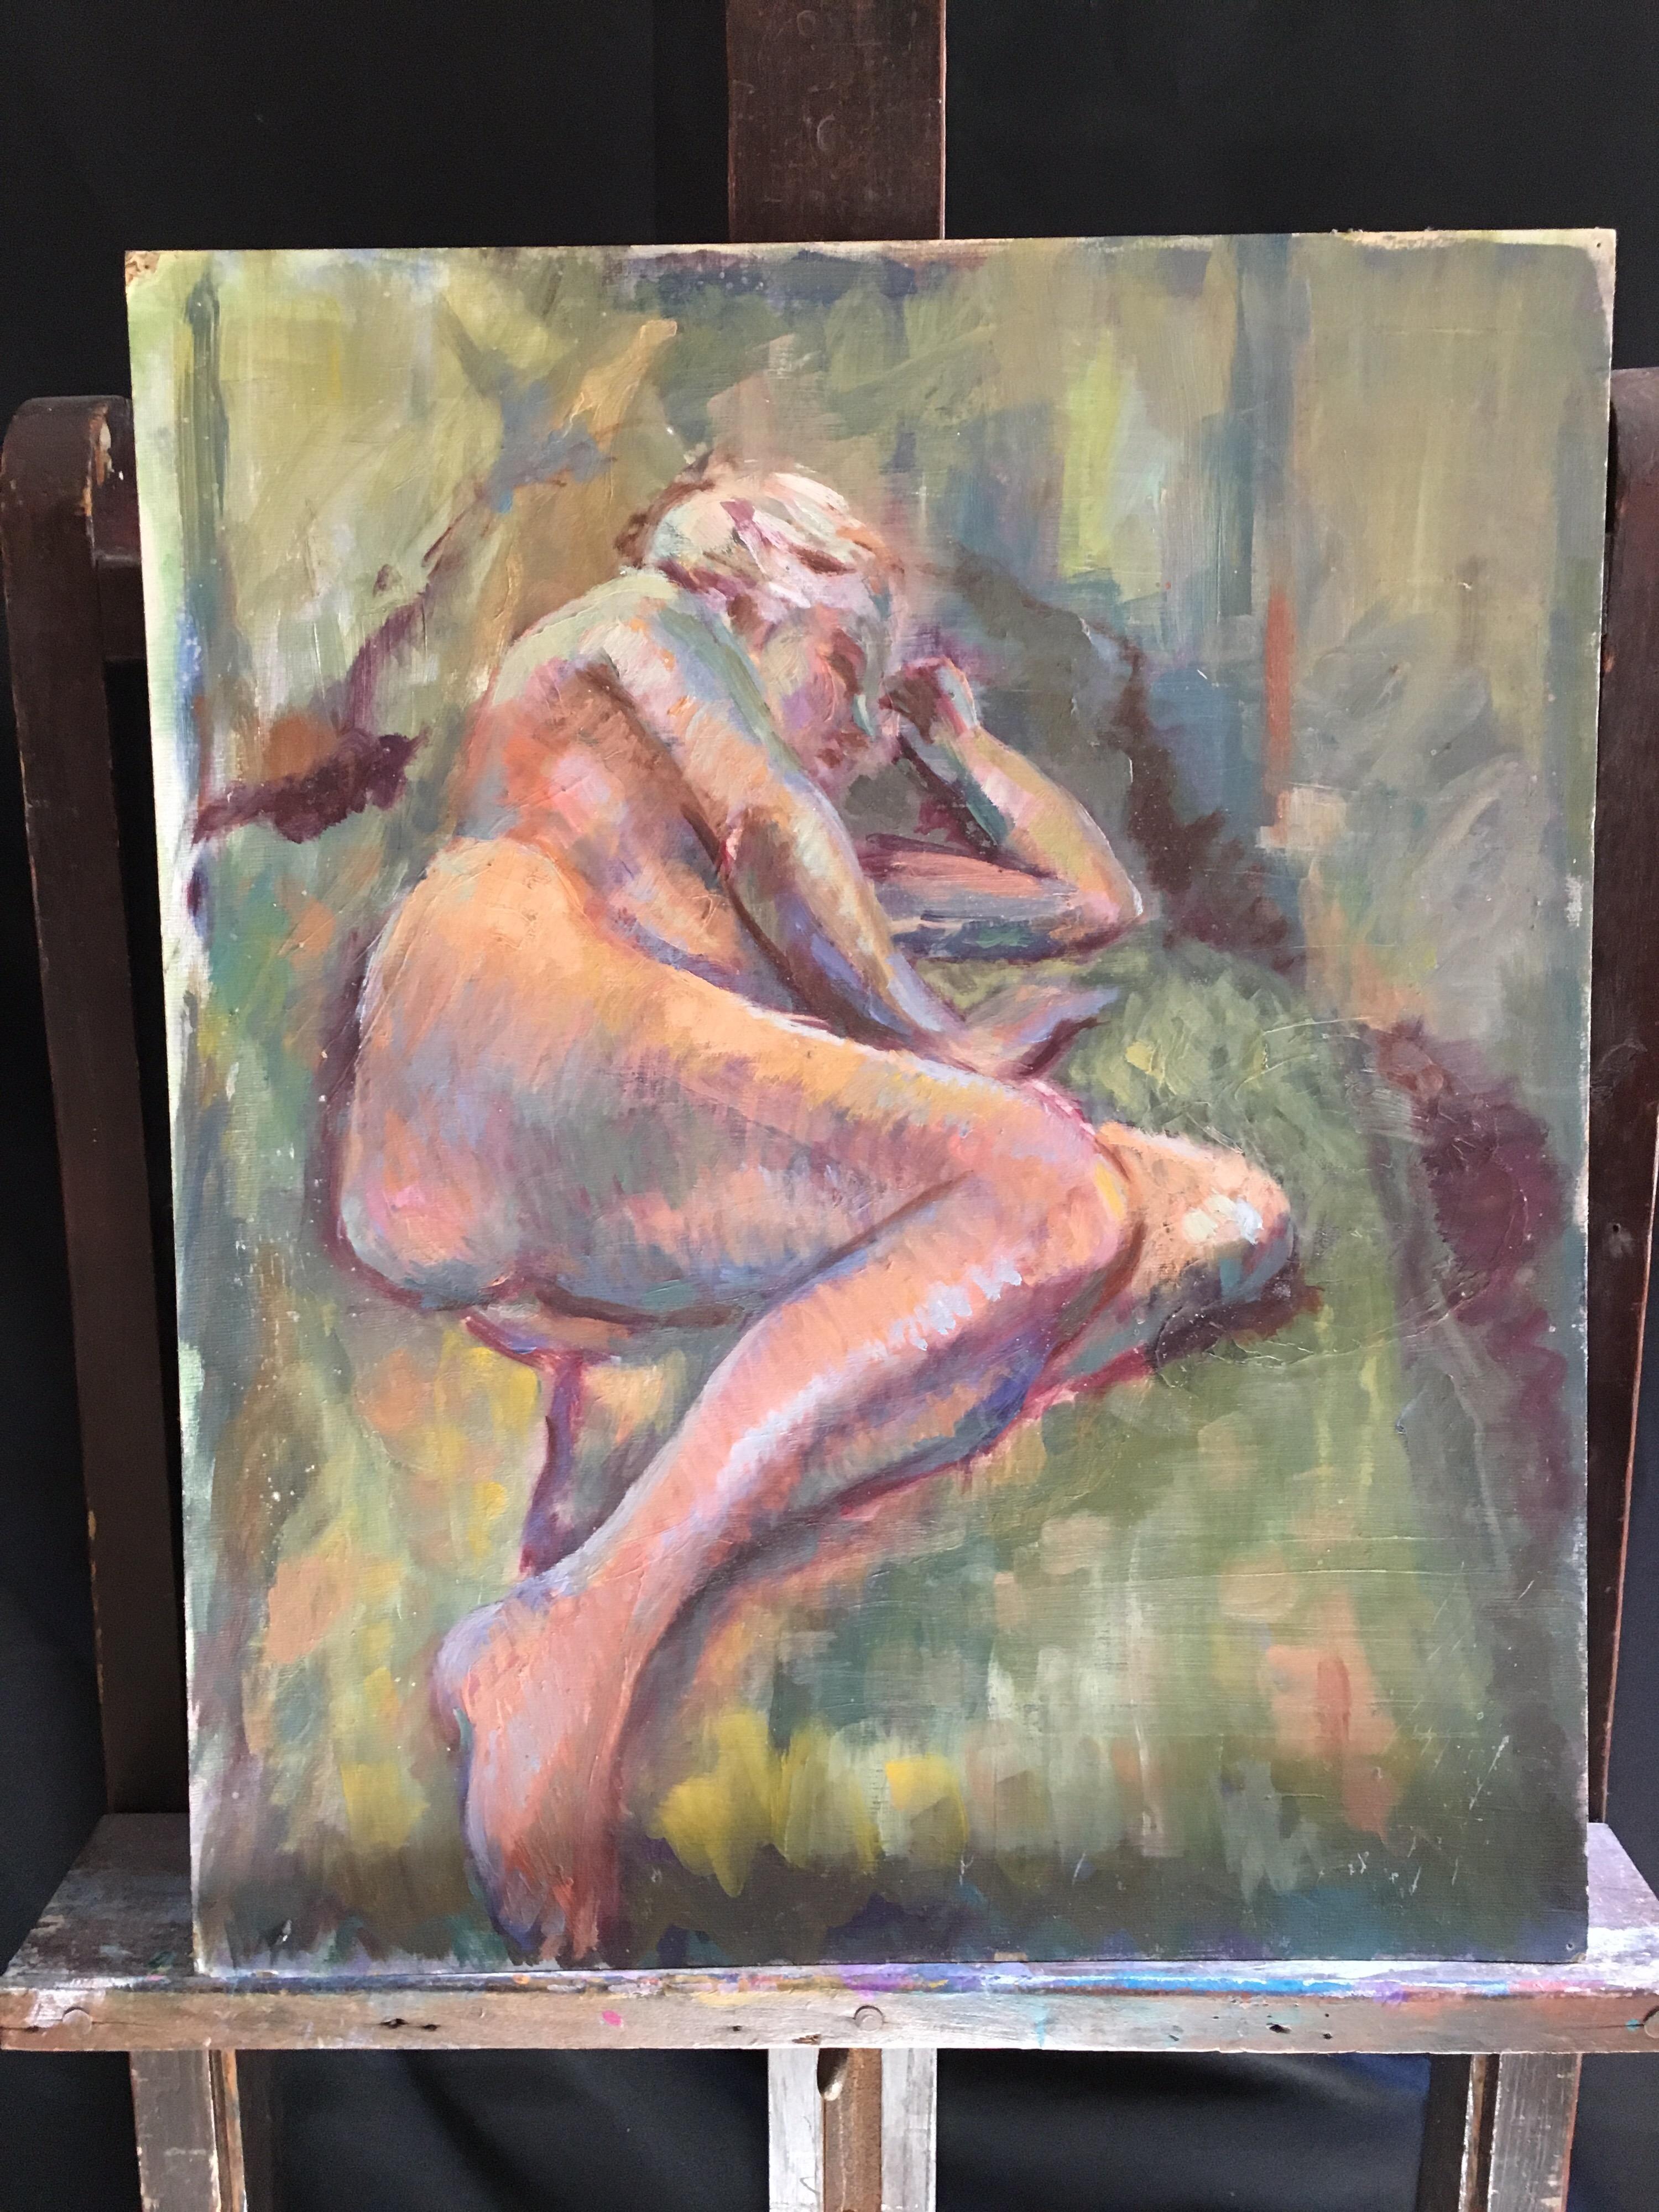 Impressionist Nude, Stylised, British Artist, Original Oil Painting
By British artist, Beryl Darton, Mid 20th Century
Oil painting on board, unframed
Board size: 24 x 20 inches

Fabulous large impressionist nude. This is a striking piece of art,